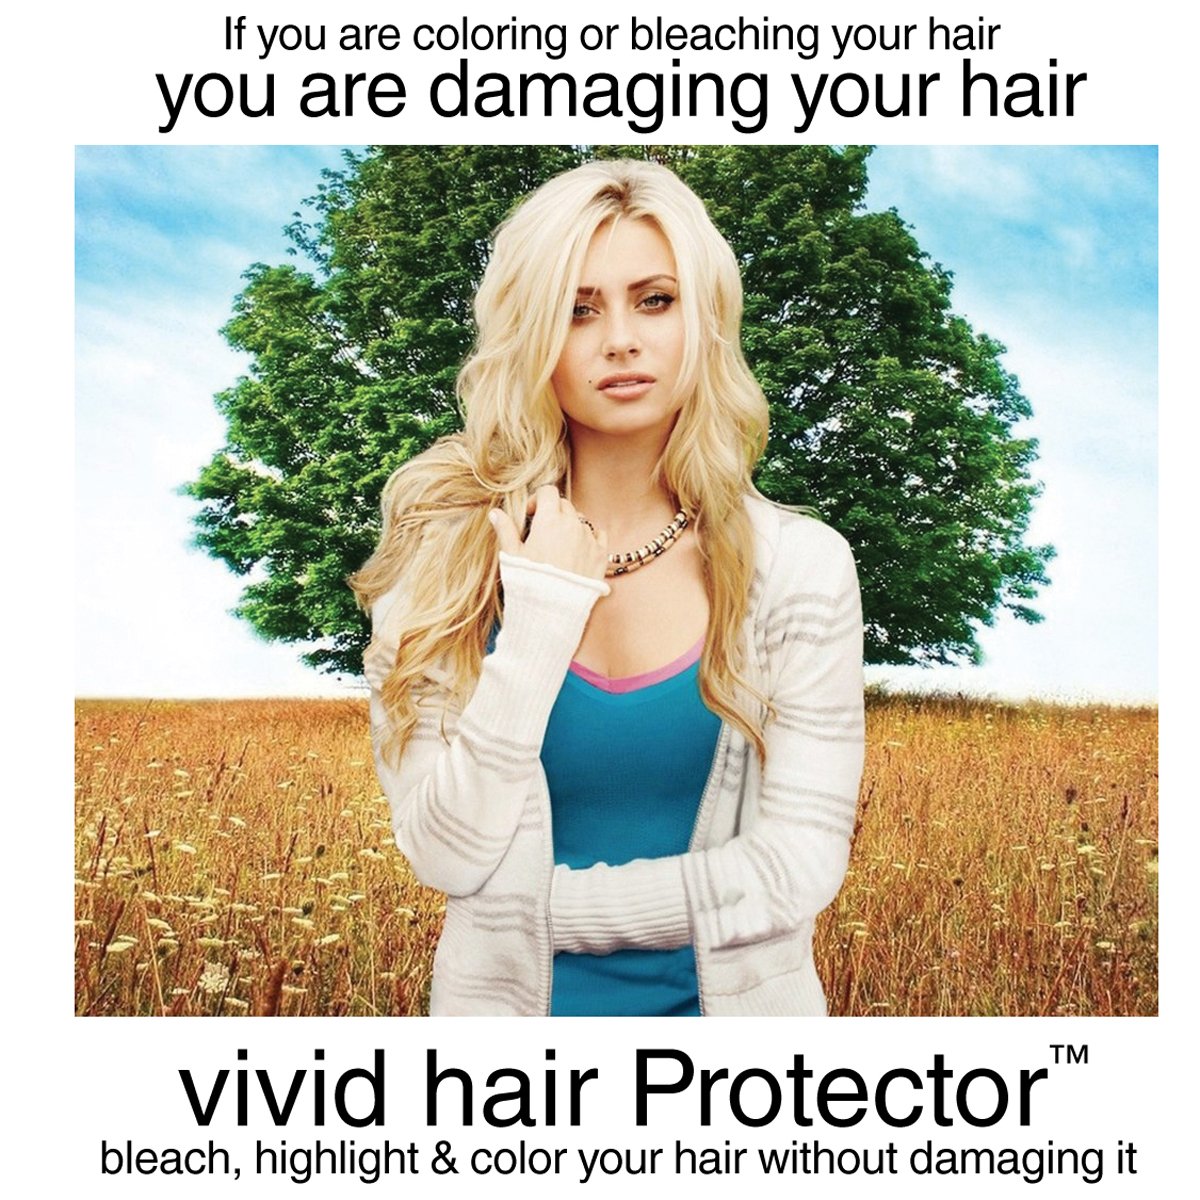 INVERTO VIVID HAIR Color Protector Perfector 120gram Prevent Hair Bleaching, Highlighting Coloring Damage From the Start safe for all blondes, vivid, bright & dark colors